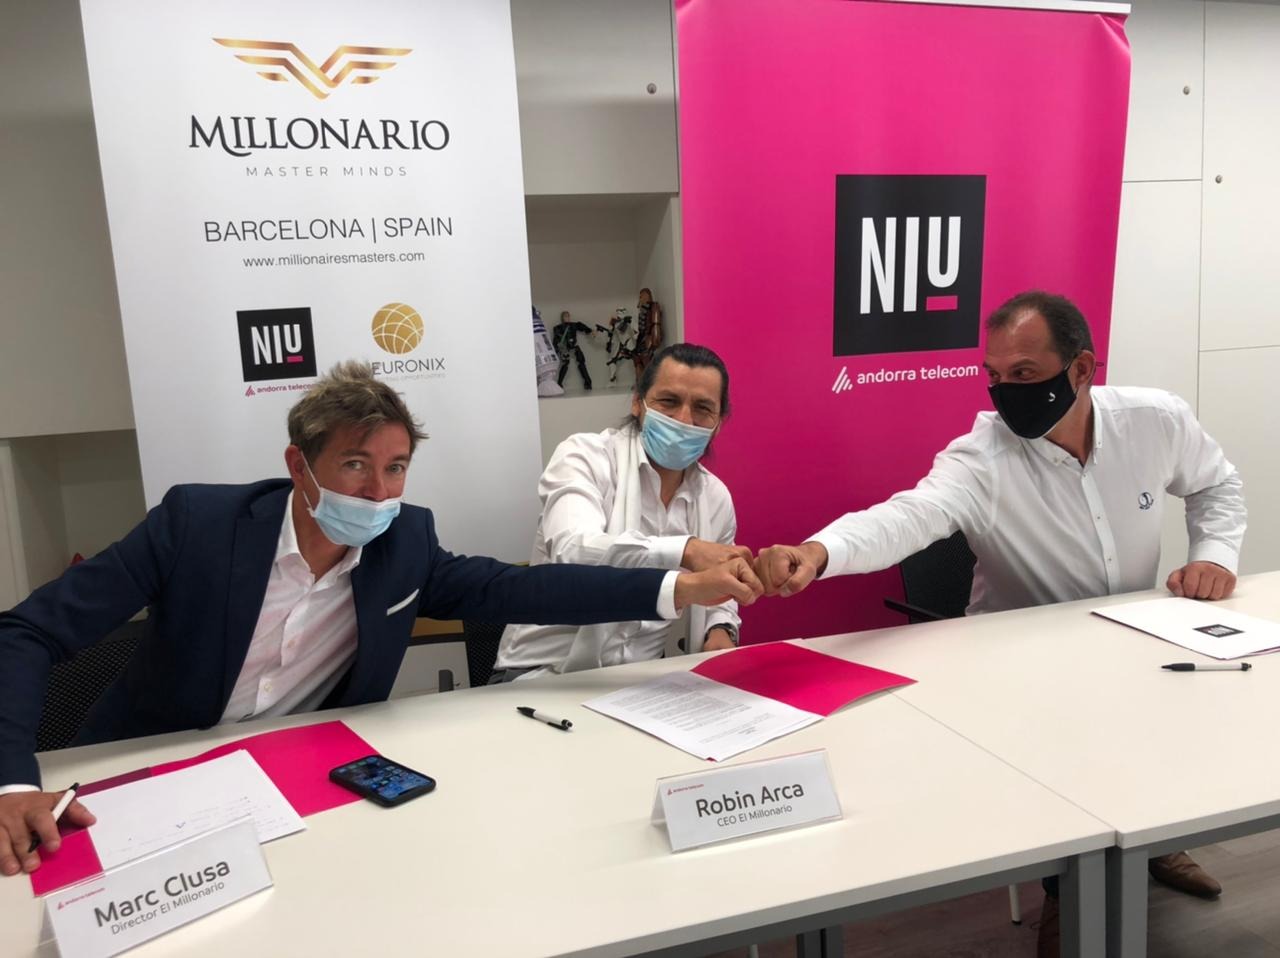 Andorra Telecom’s NIU will take part in the Millonario Master Minds international business summit